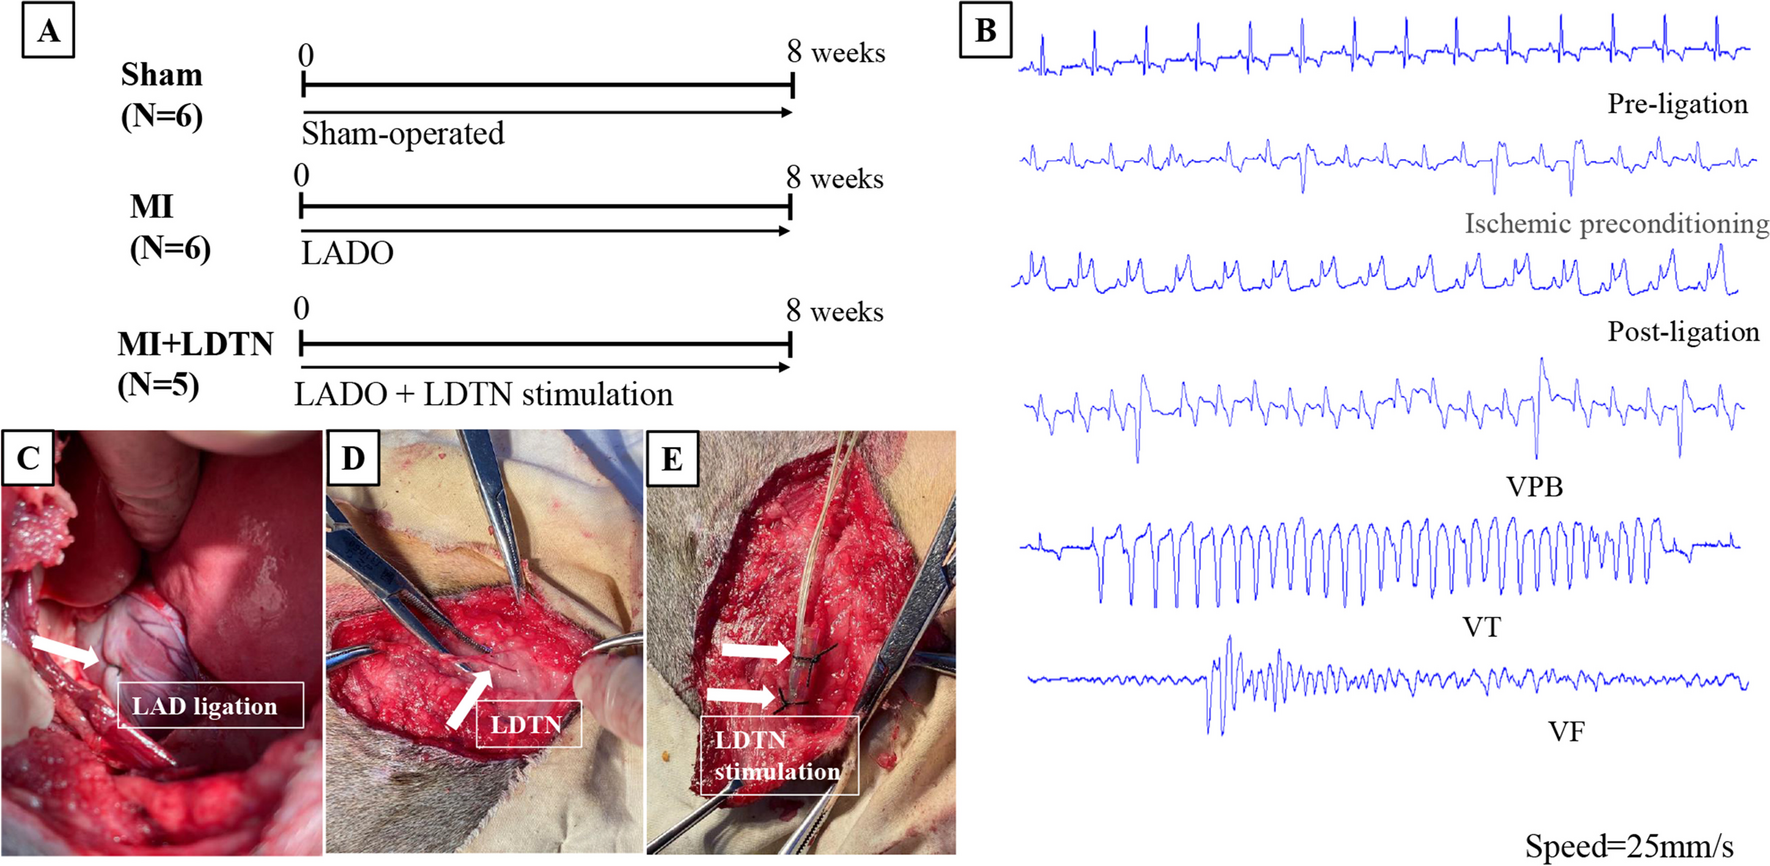 Long-Term Stimulation of the Left Dorsal Branch of the Thoracic Nerve Improves Ventricular Electrical Remodeling in a Canine Model of Chronic Myocardial Infarction